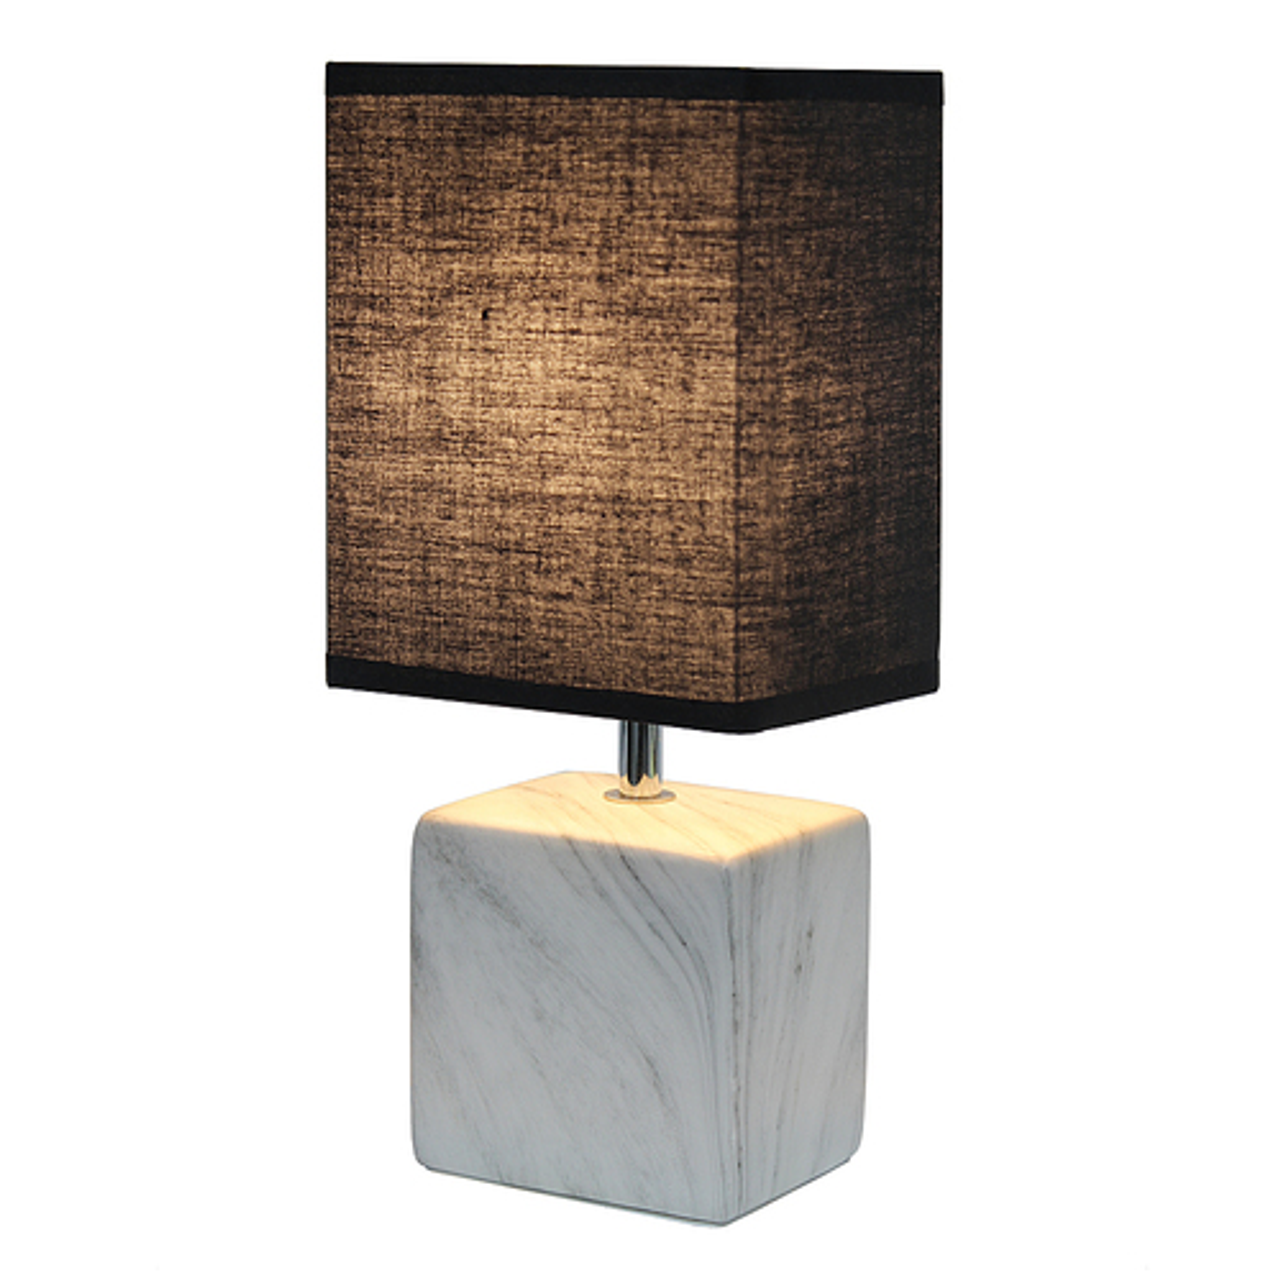 Simple Designs Petite Marbled Ceramic Table Lamp with Fabric Shade, White with Black Shade - White base/Black shade